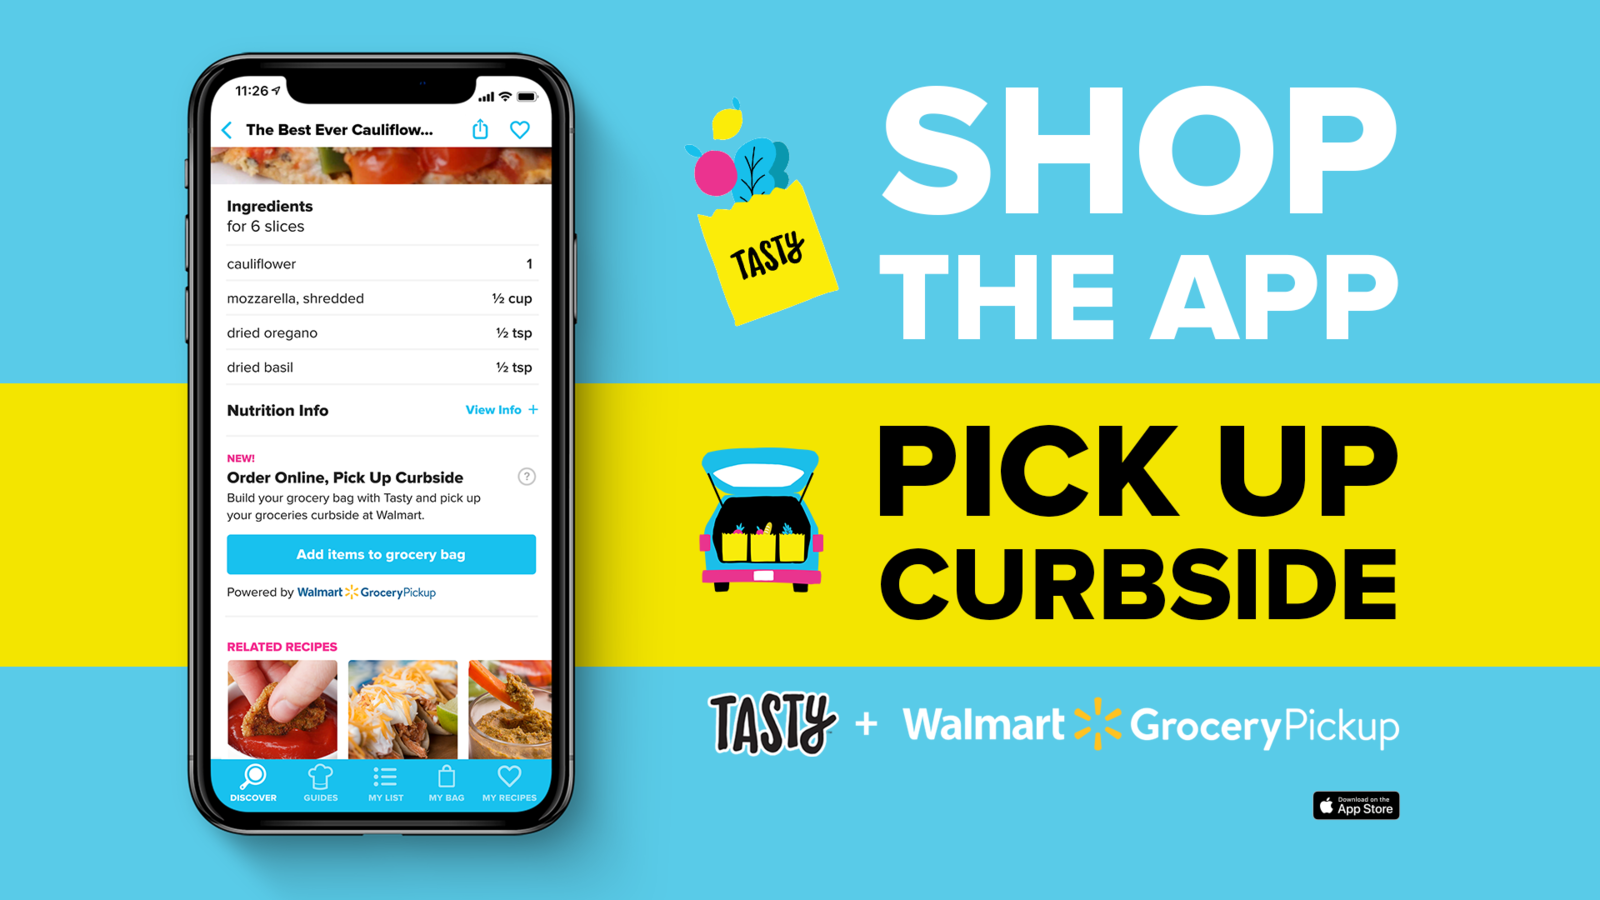 Smartphone displaying Tasty recipe app, with &quot;SHOP THE APP PICK UP CURBSIDE&quot; text and Walmart and Tasty logos